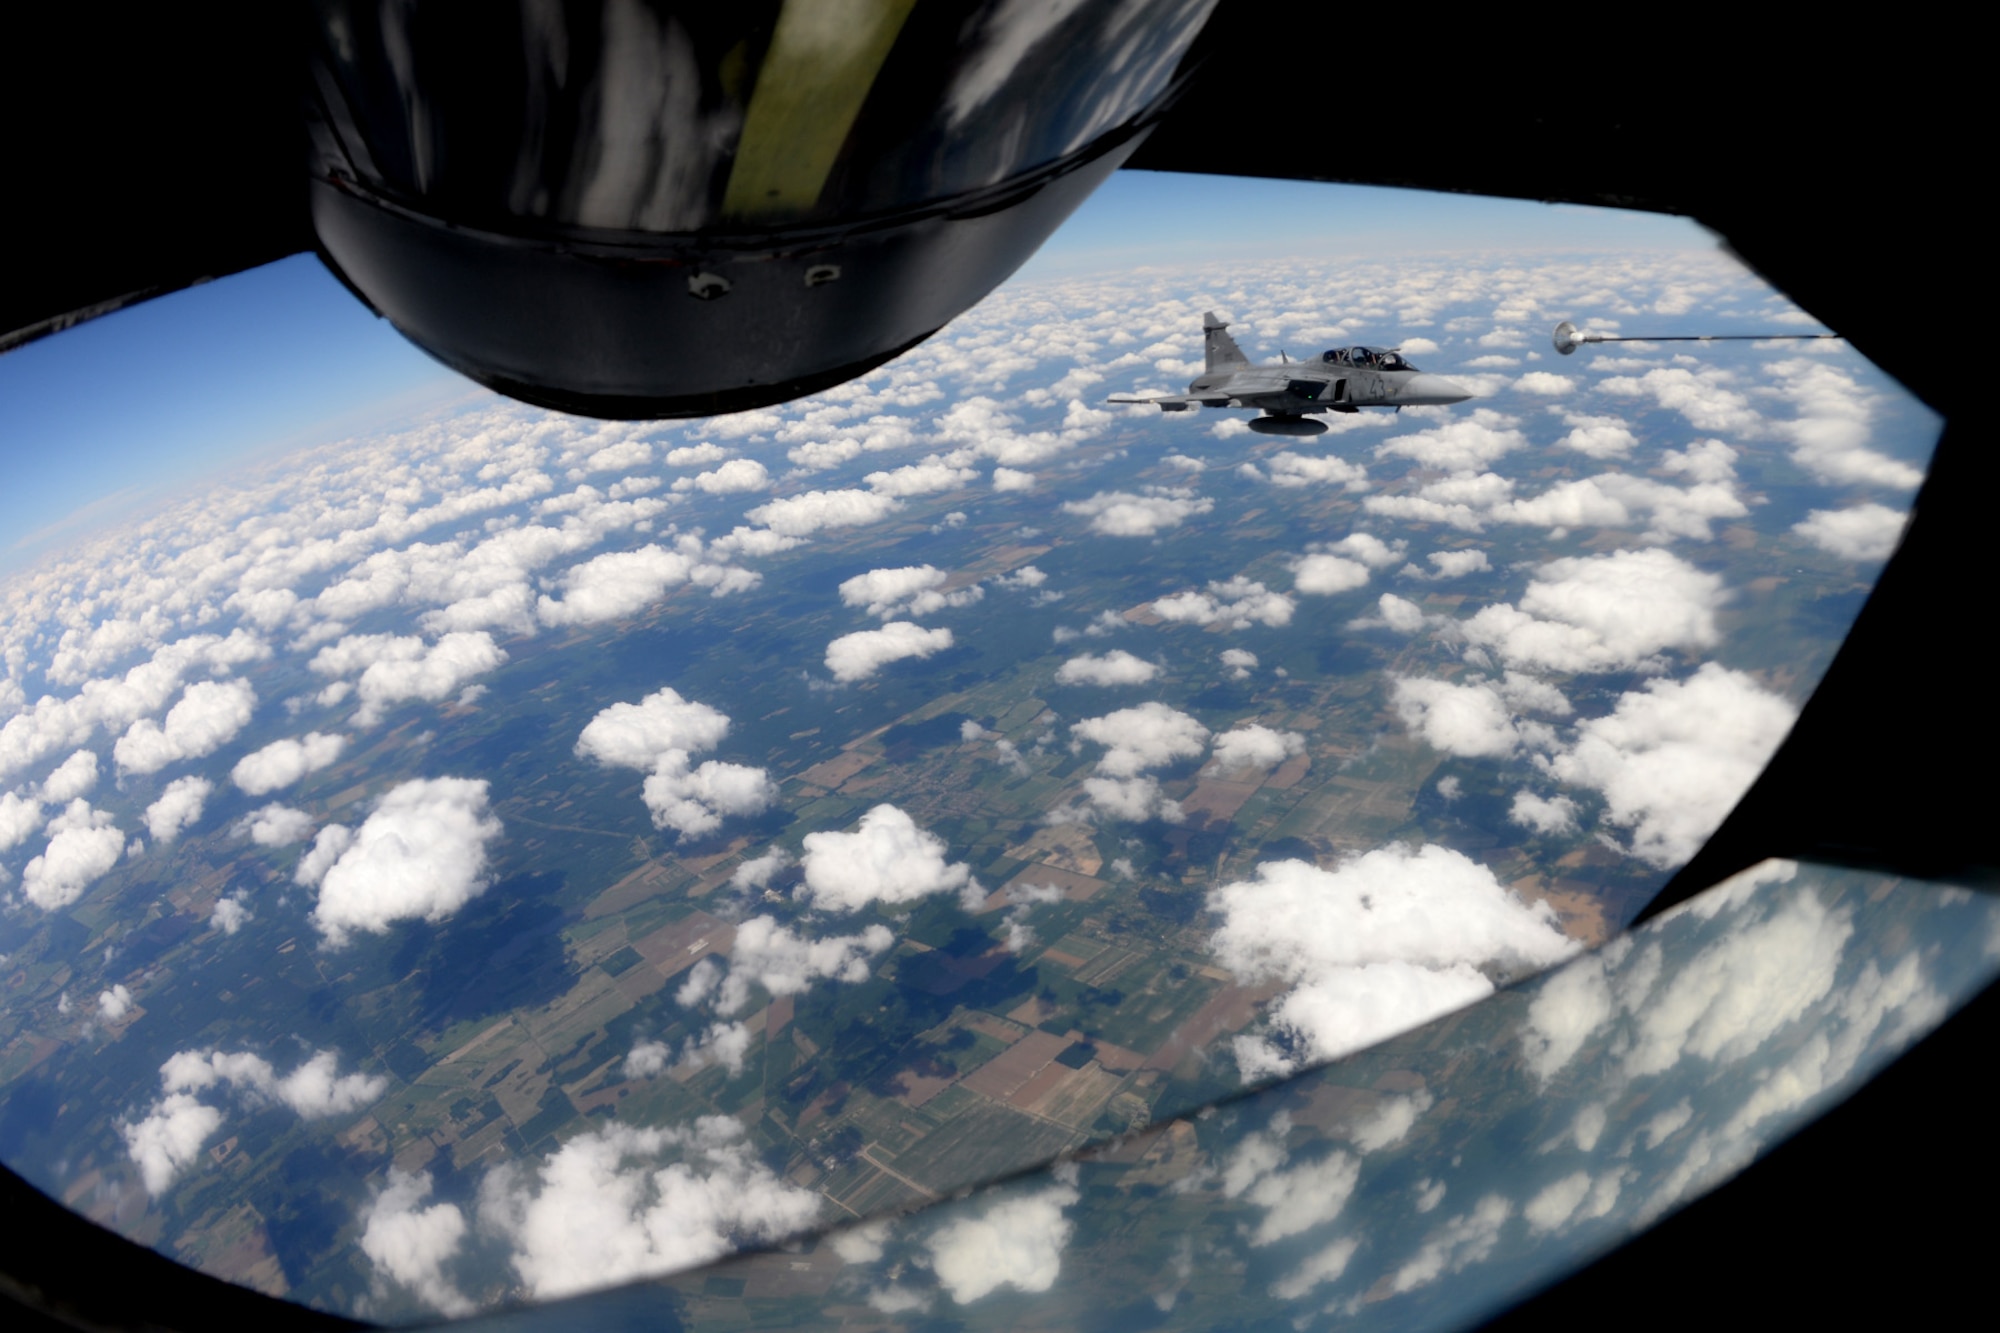 A Hungarian air force JAS-39 Gripen approaches a multi-point refueling system basket June 25, 2015, during air refueling familiarization training over Hungary. Hungarian, U.S. and Swedish air force personnel met for a two-week familiarization period enabling the Hungarian JAS-39 Gripen pilots to successfully perform air refueling for the first time. (U.S. Air Force photo by Senior Airman Kate Thornton/Released)